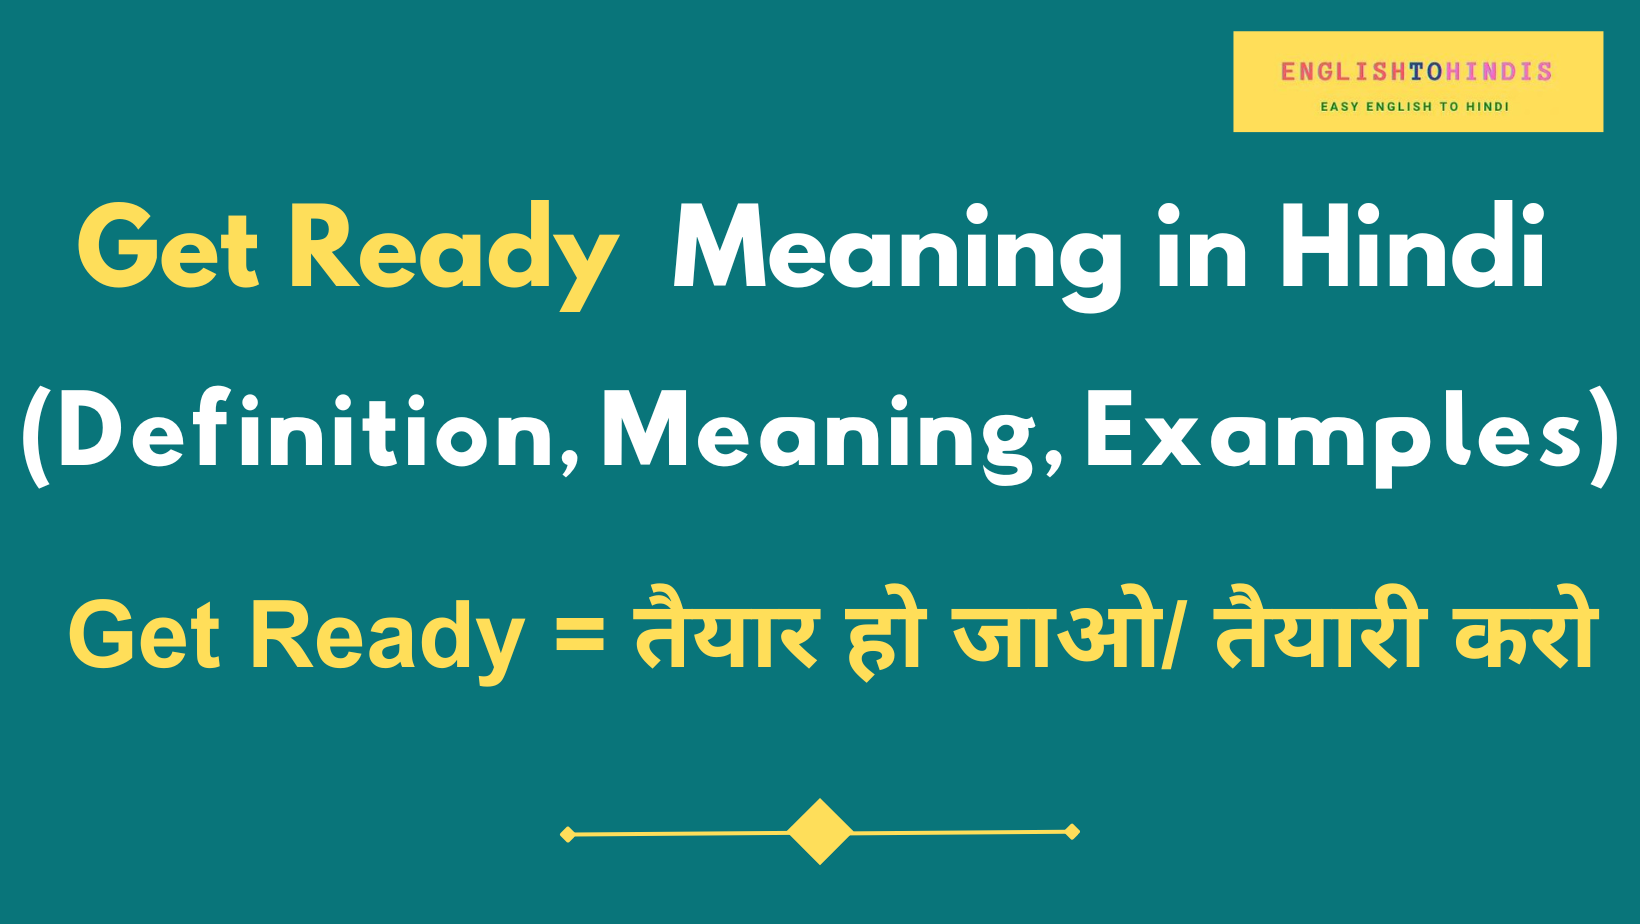 Get Ready Meaning in Hindi